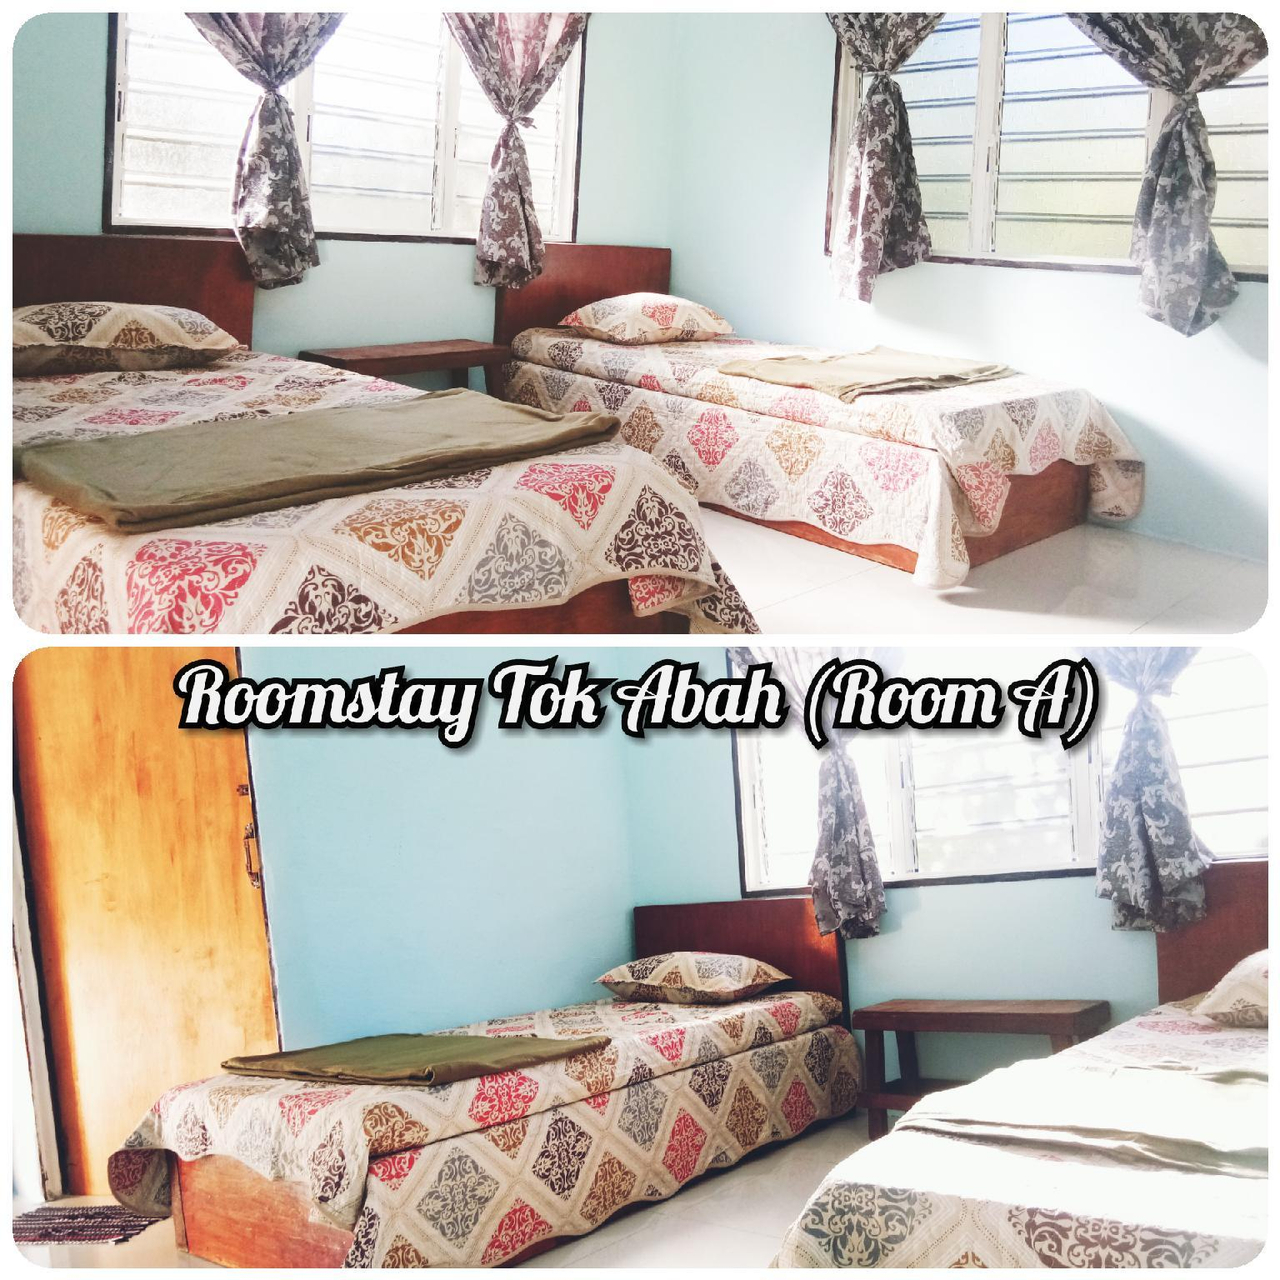 Bedroom 1, RoomStay Tok Abah  A, Rompin